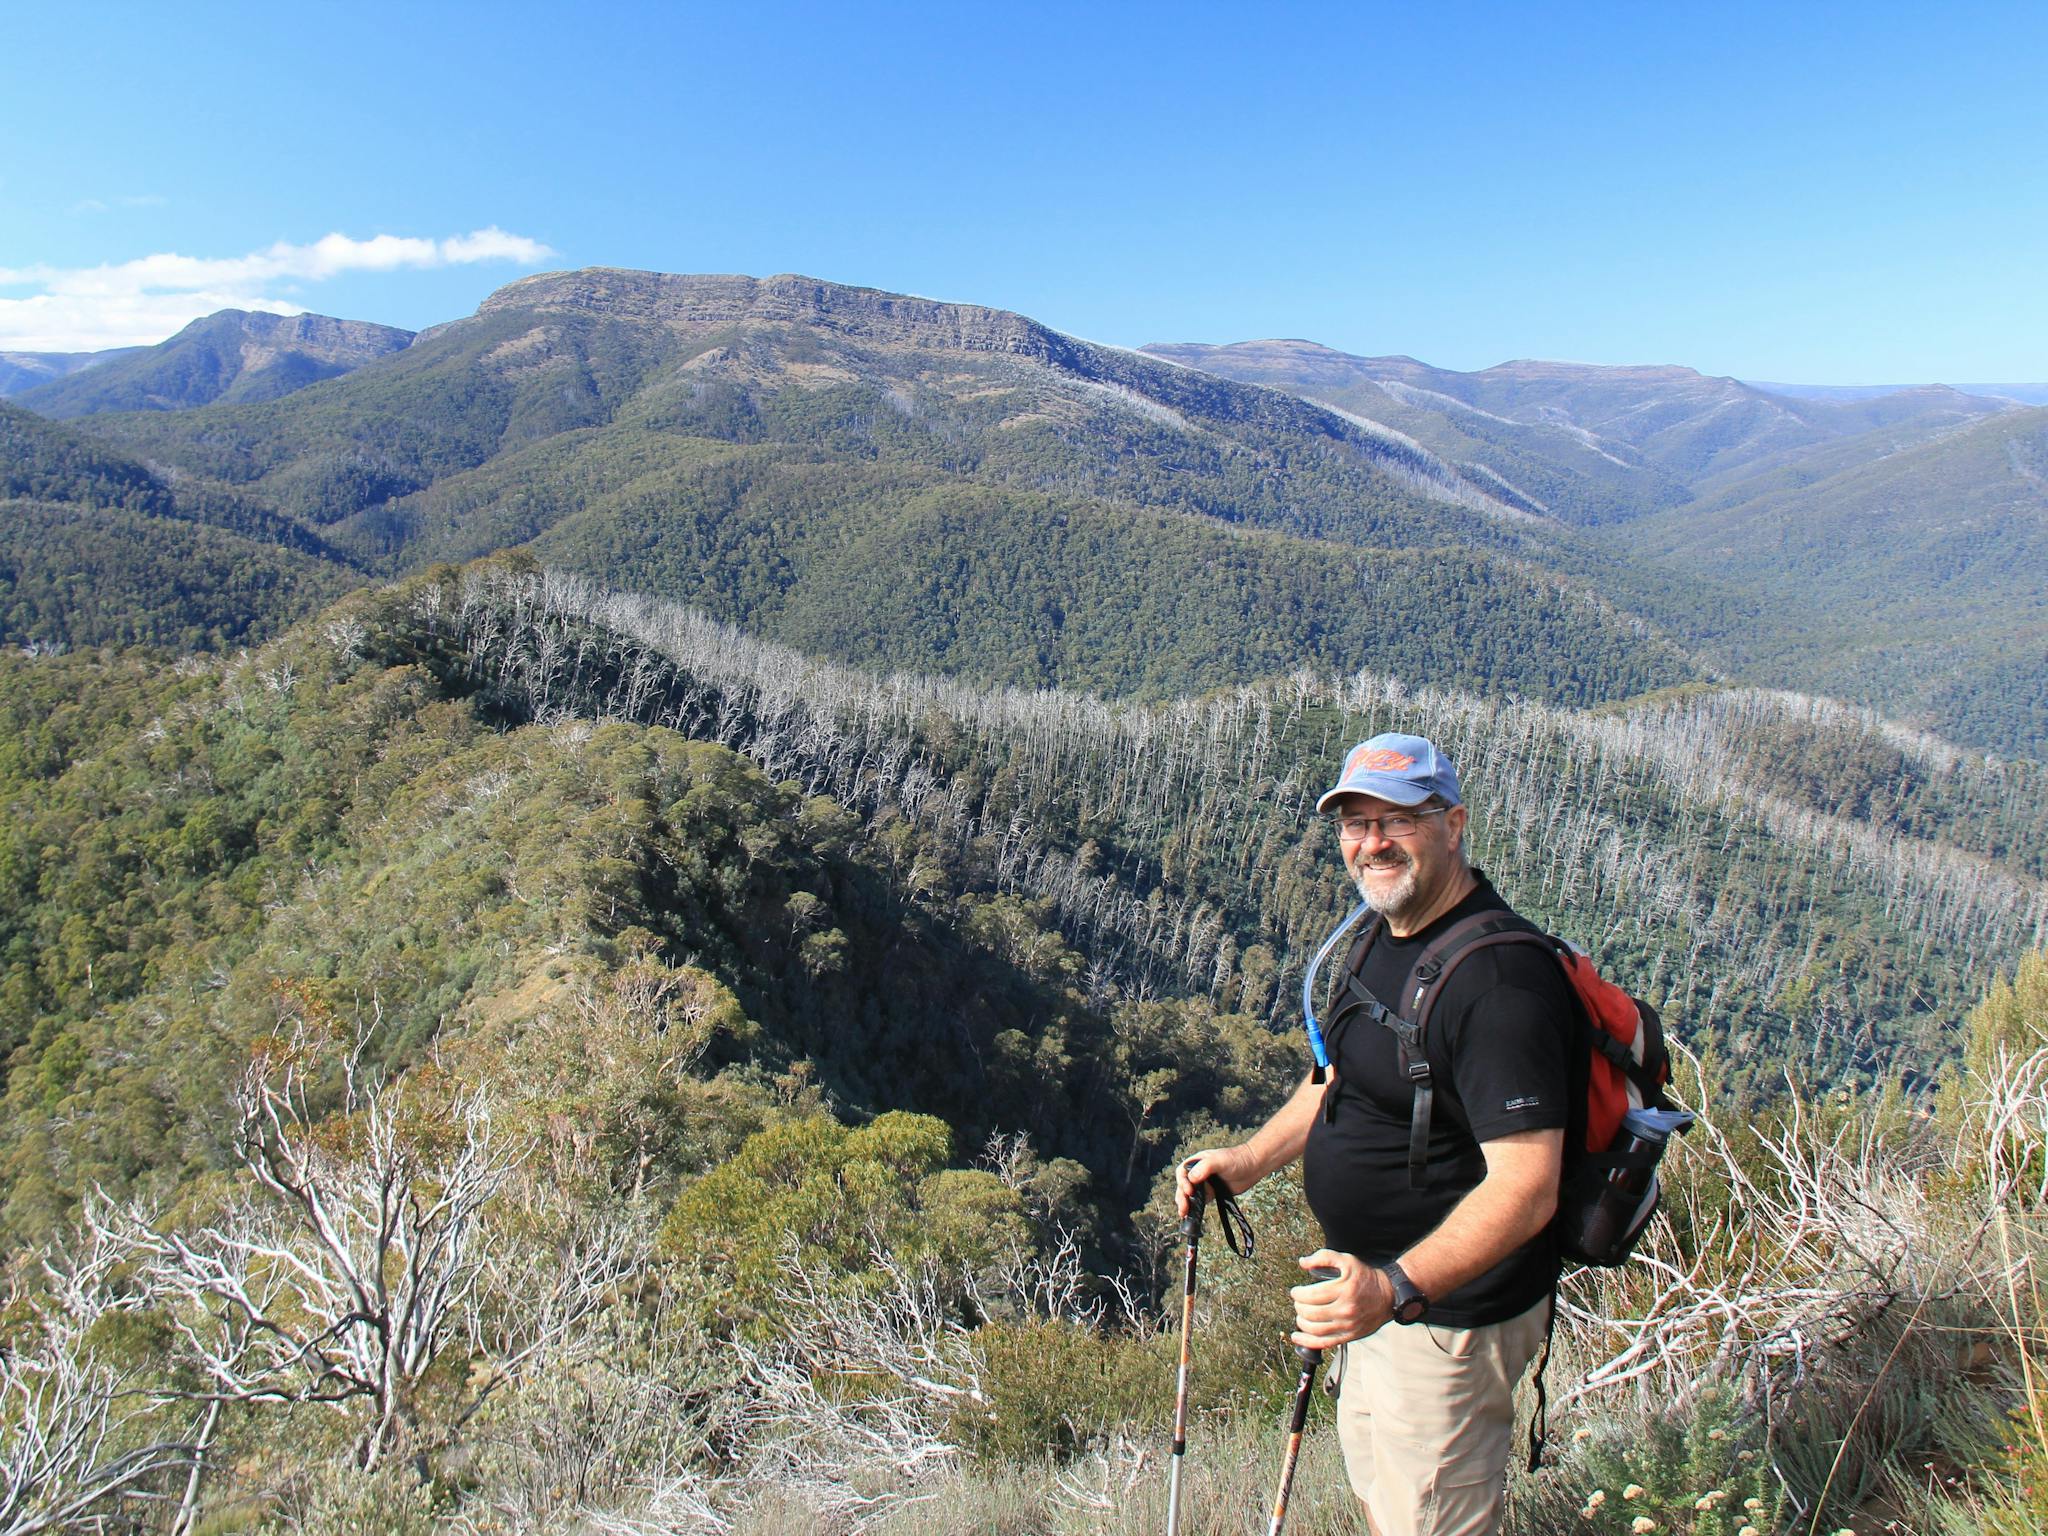 A hiker with a brilliant view of The Bluff and Mt Eadley Stoney, and The Crosscut Saw on the horizon